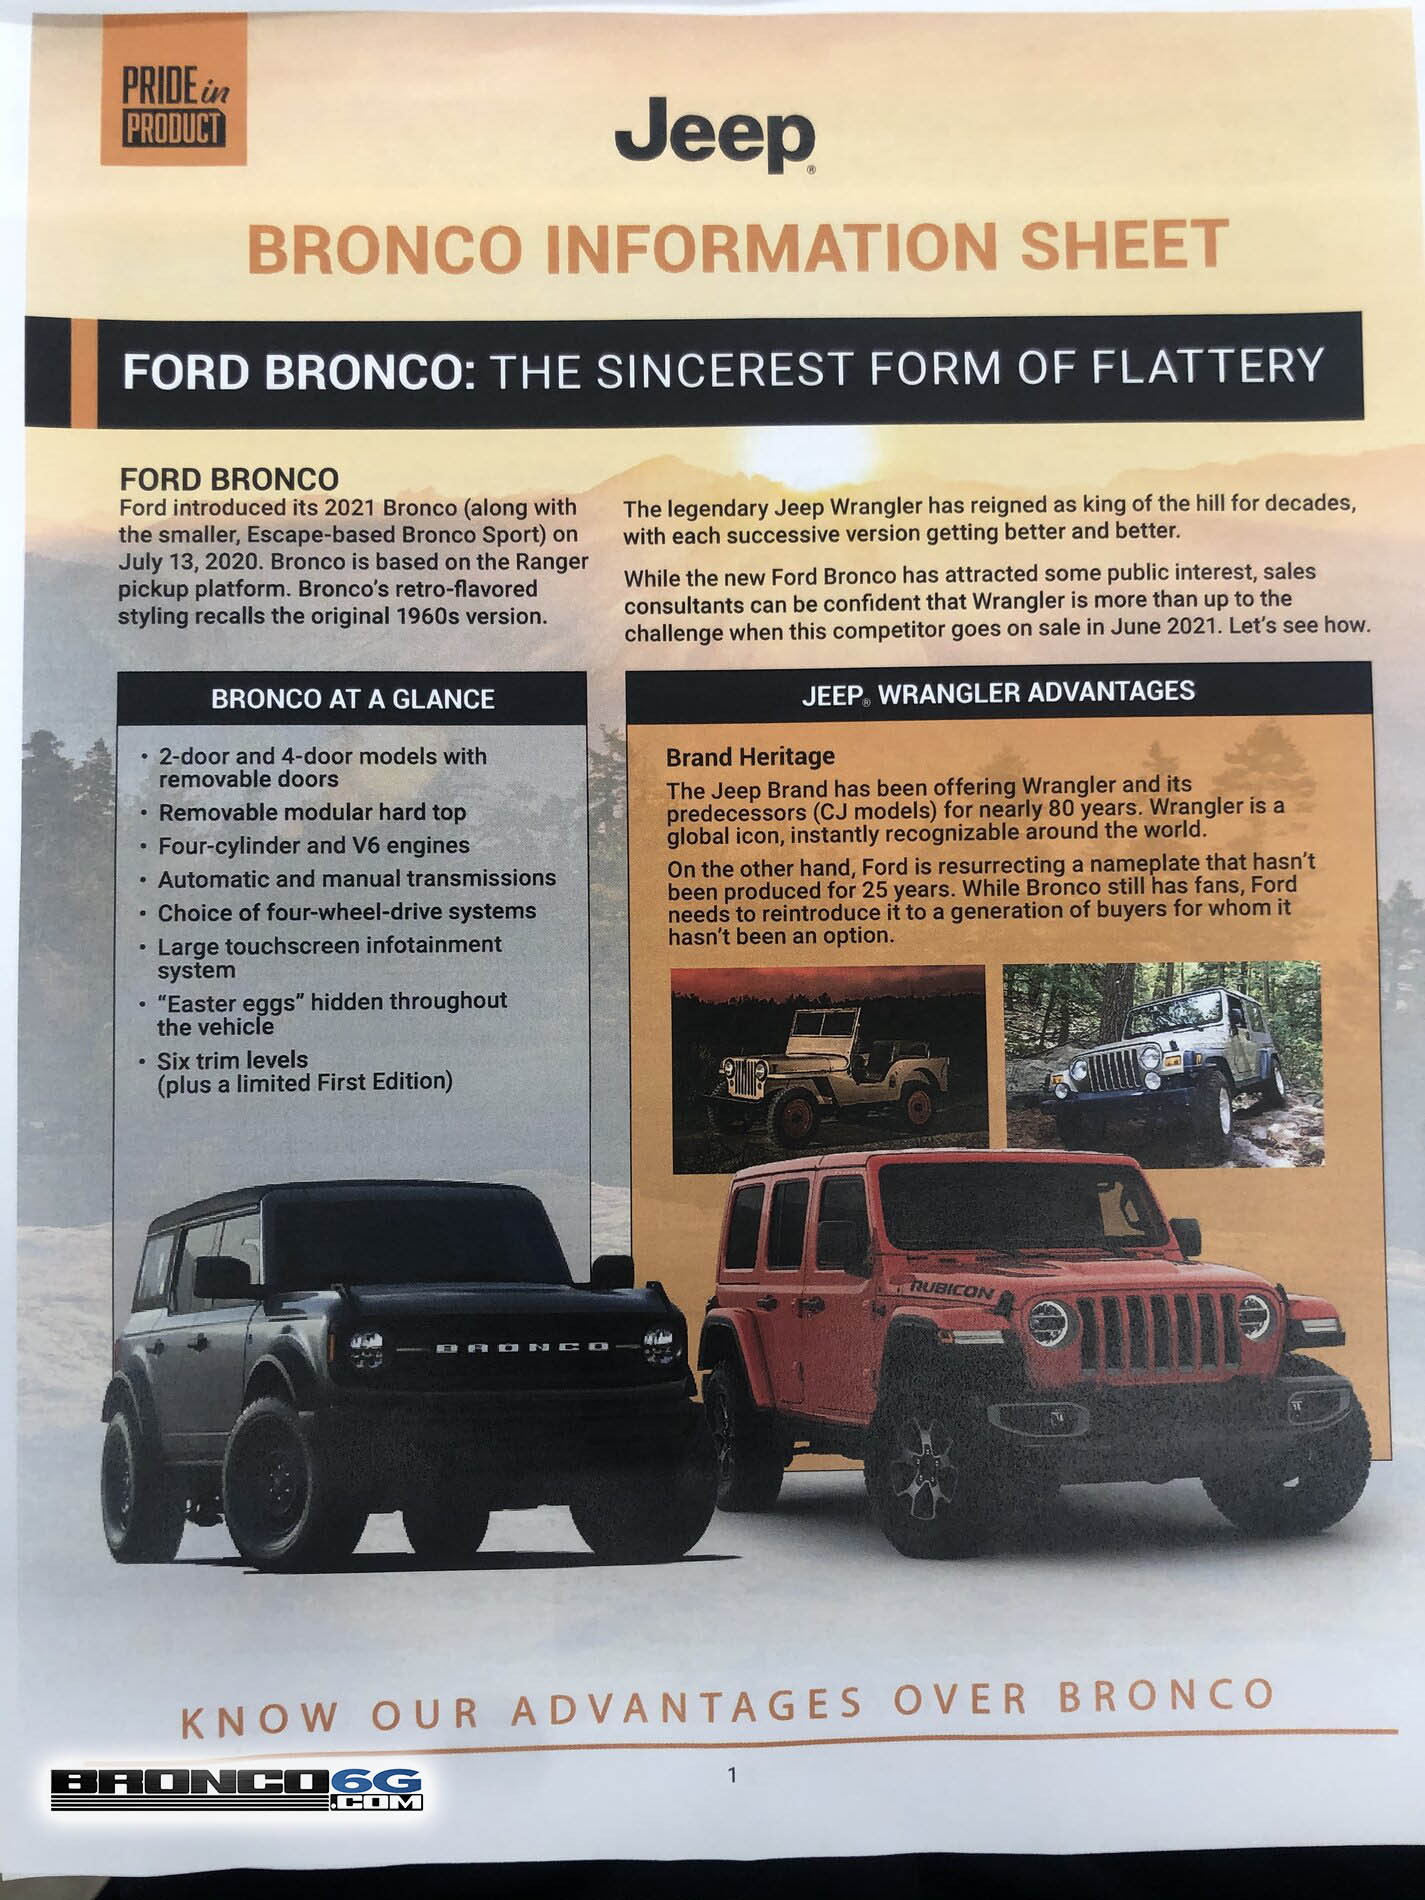 Here’s How Jeep Is Training Its Dealerships To Take On The Ford Bronco